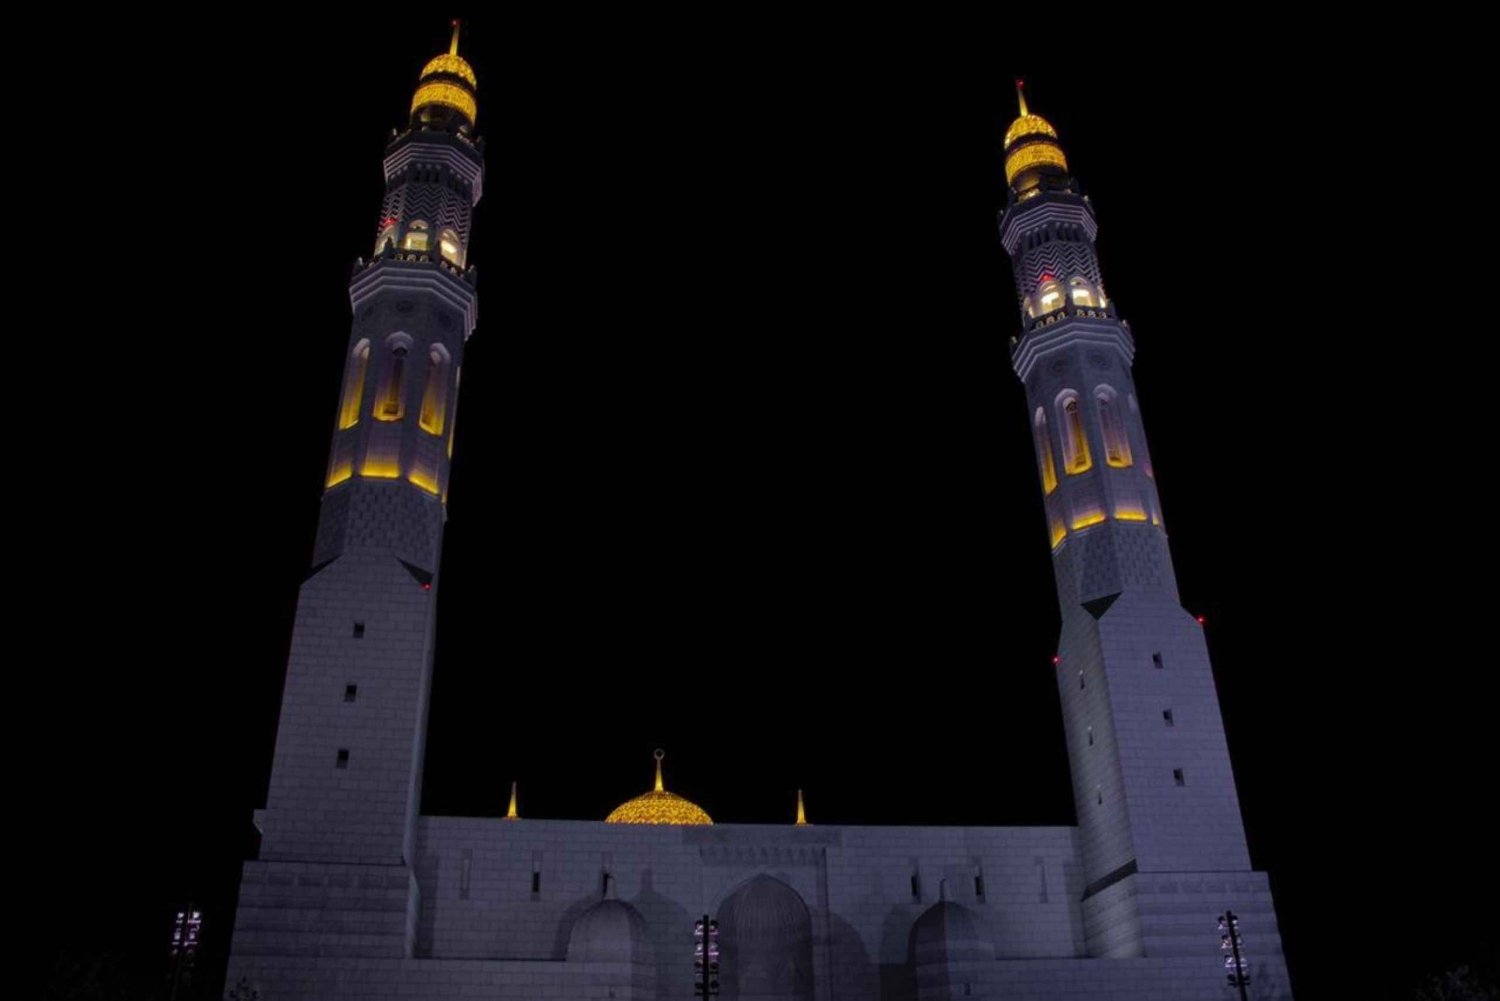 Muscat private evening or night tour 4 hours